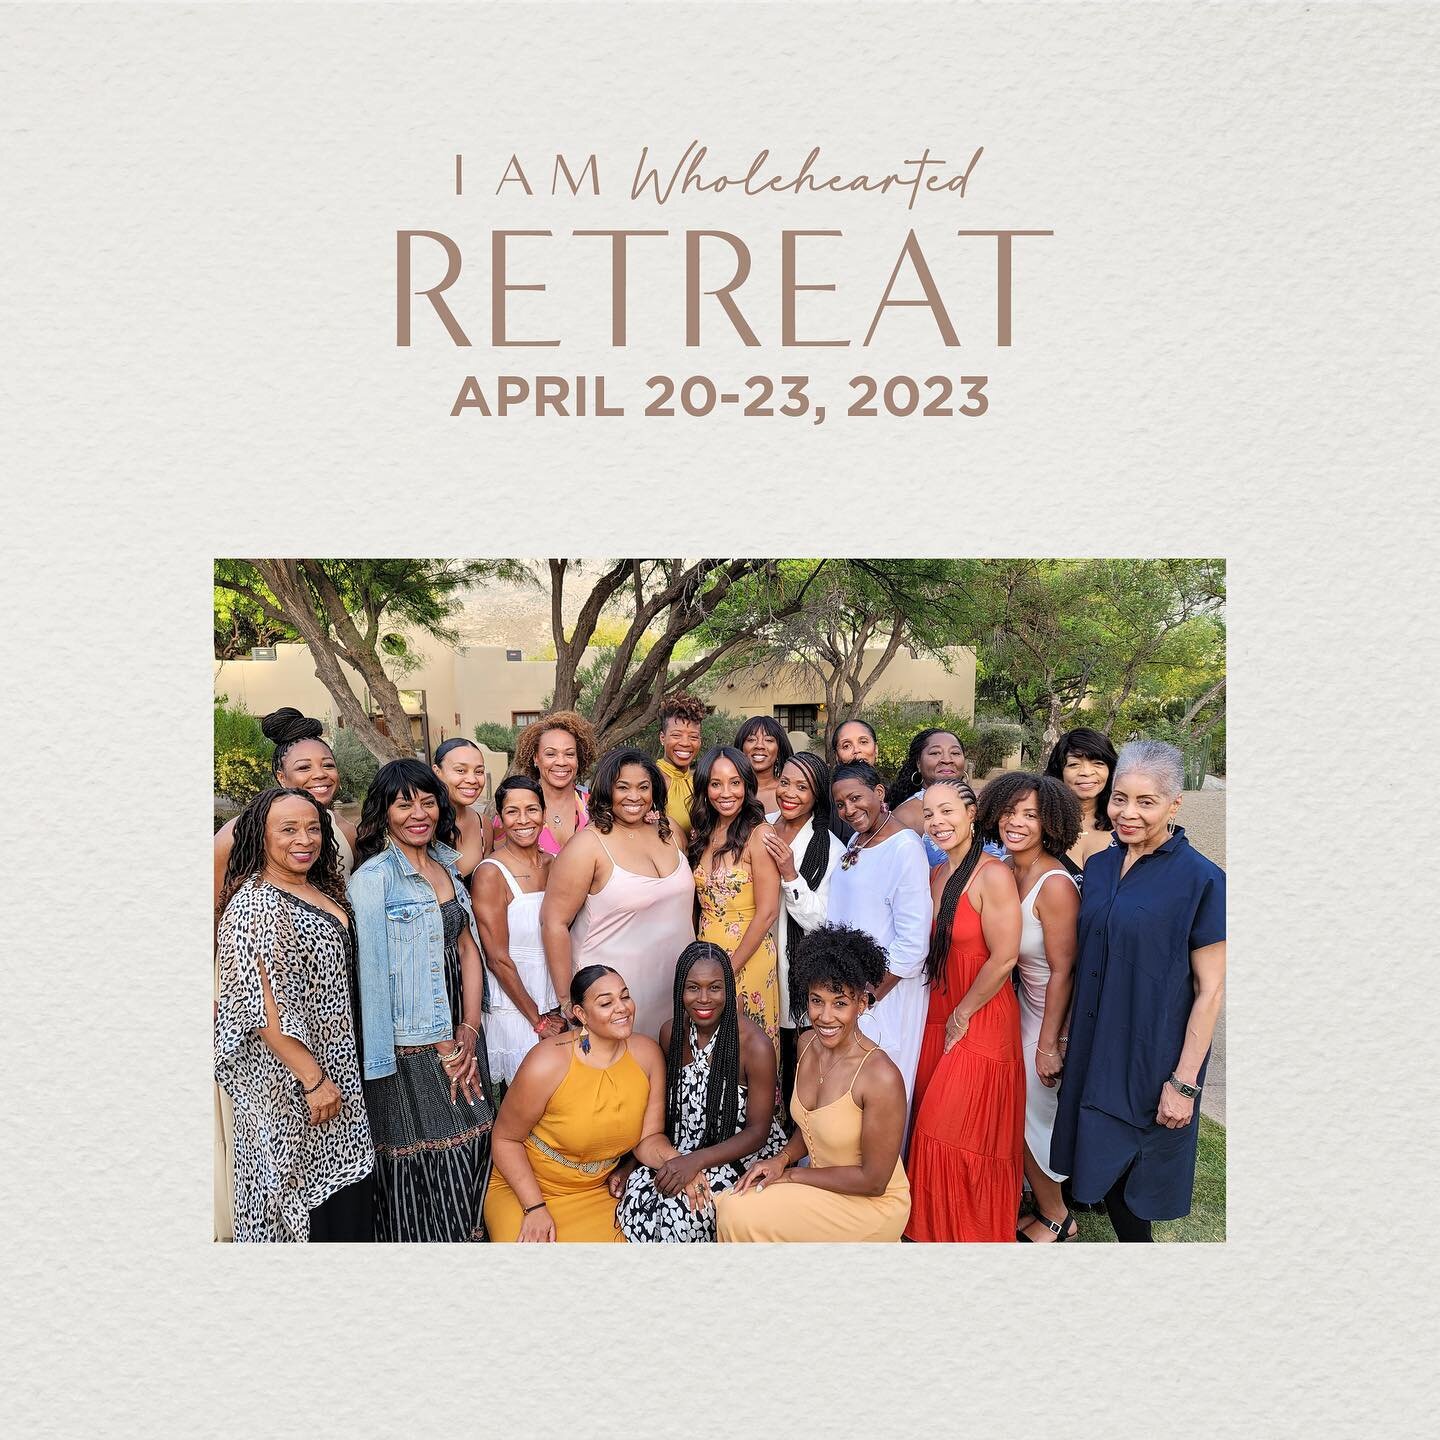 Join our heartwarming group on this year's I Am Wholehearted Retreat to bring a new light to our everyday lives. Learn more and register link in bio. (Registration open until March 10th)

&bull;
&bull;
&bull;
&bull;
&bull;

#IAmWholehearted #wholehea